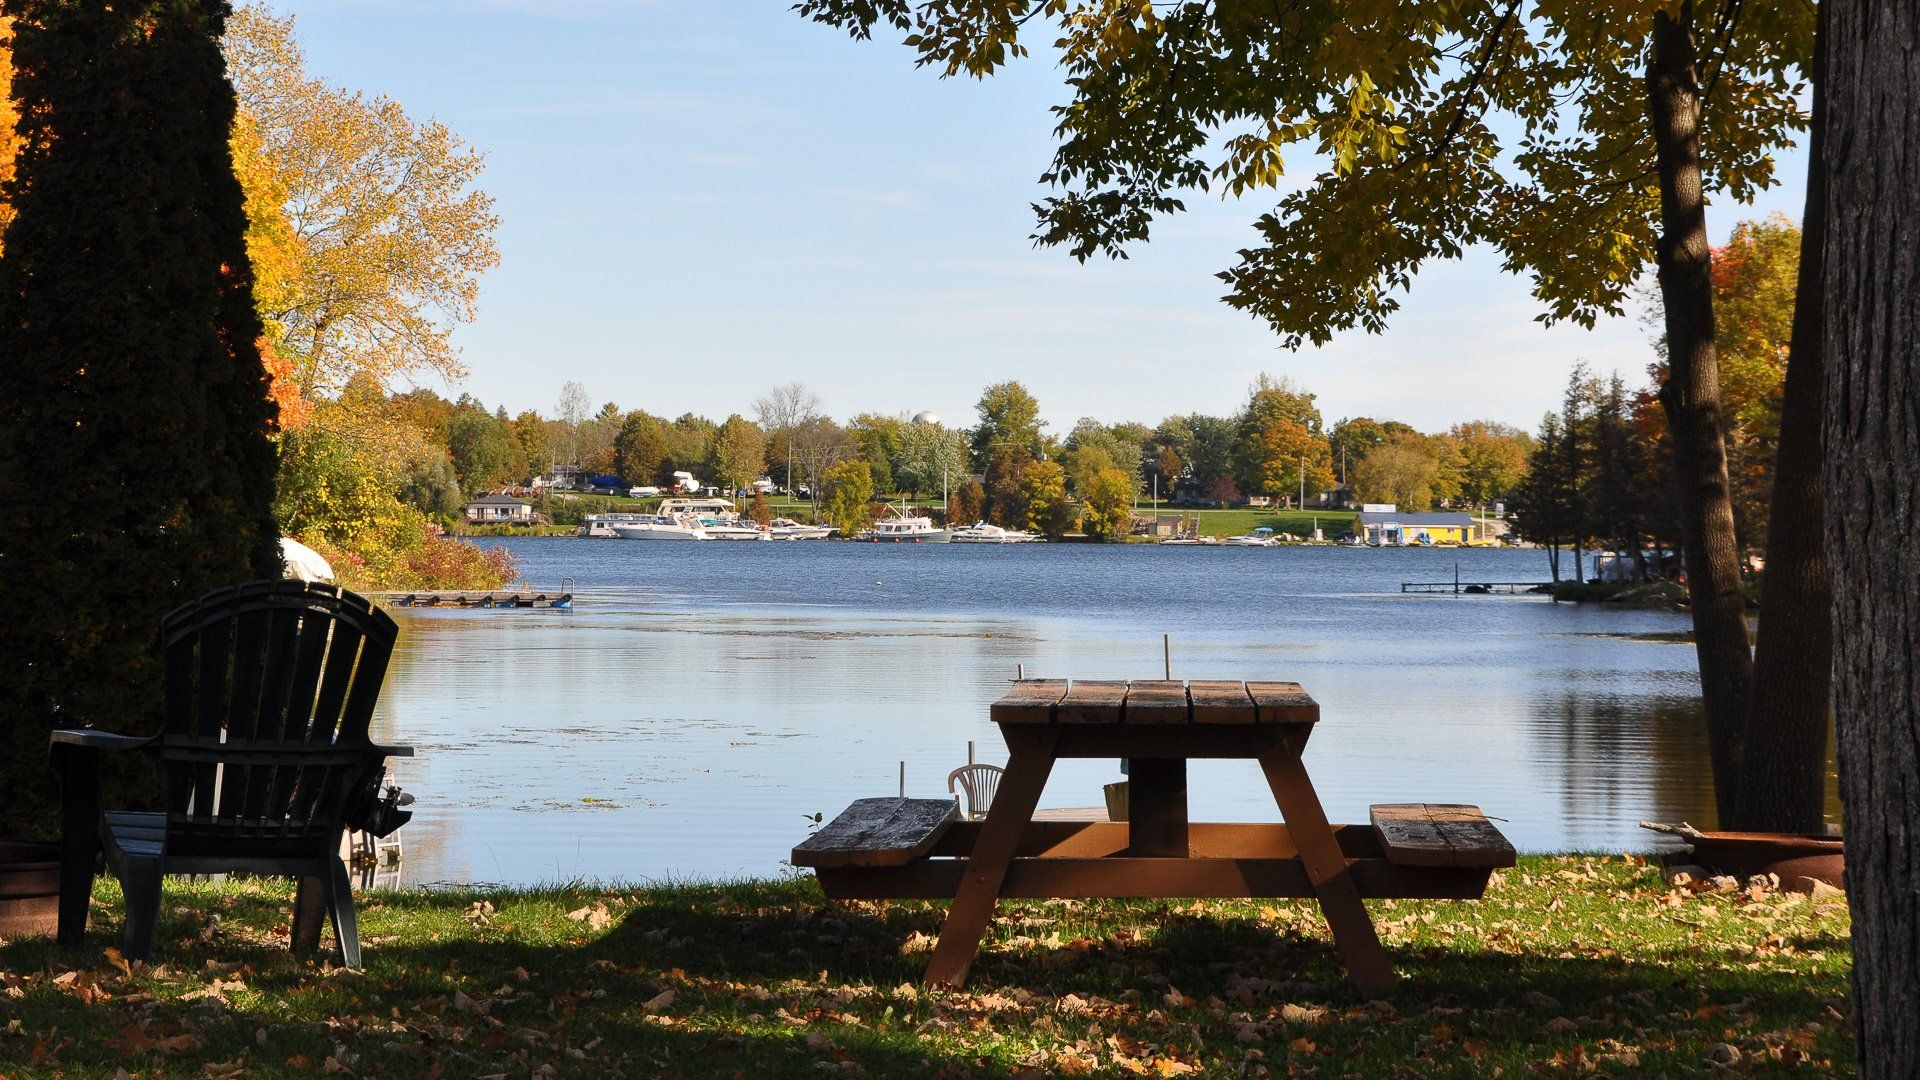 A picnic table sits in the grass near a lake